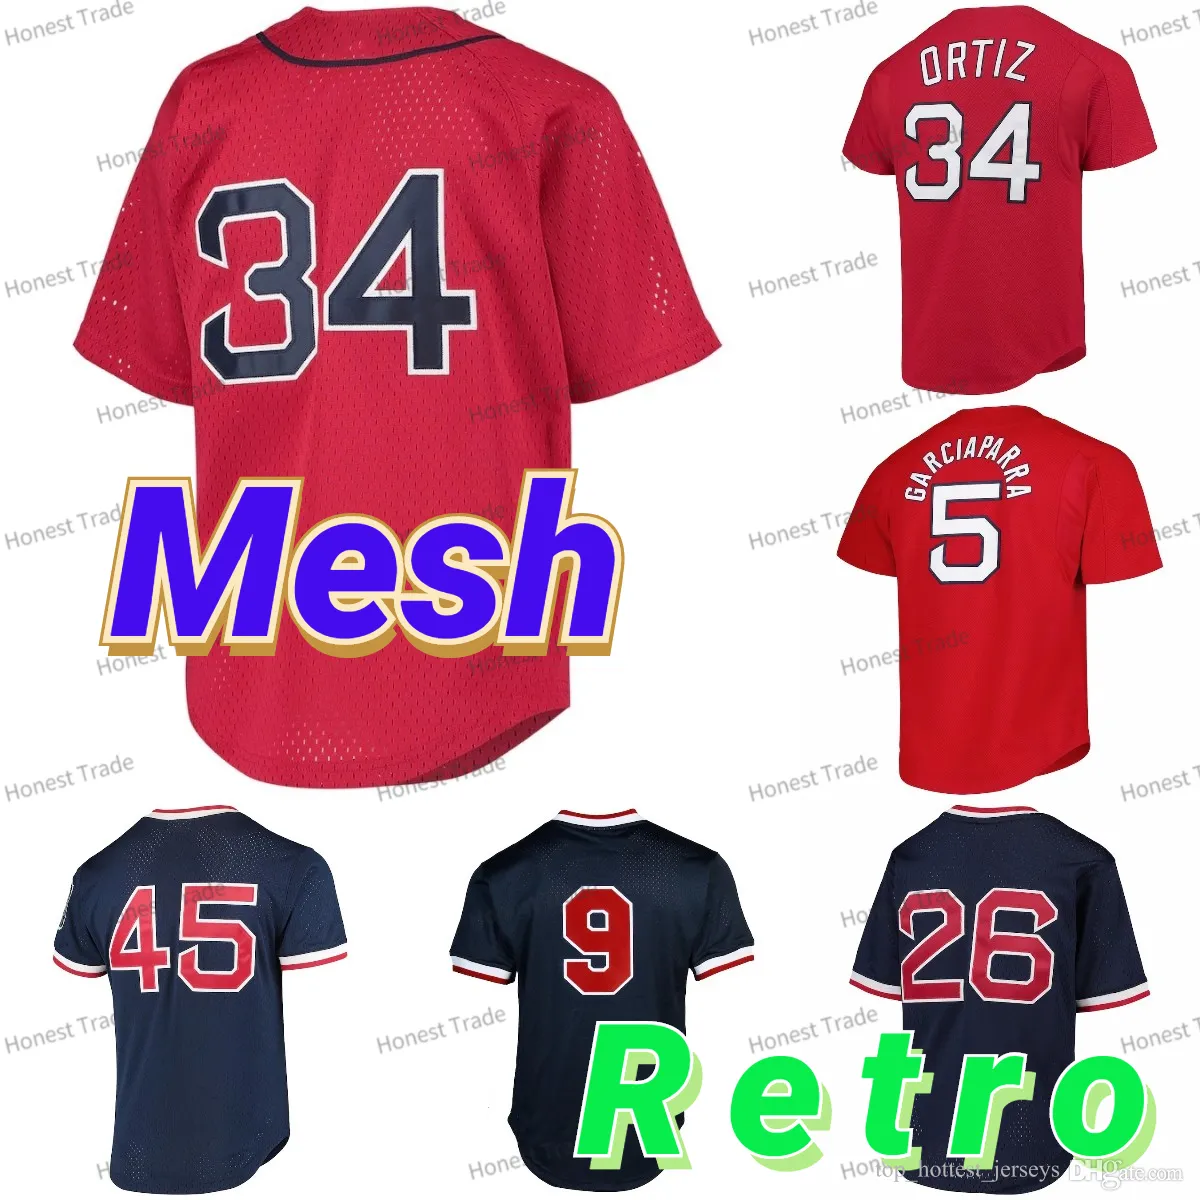 Retro Jersey David Ortiz Garciaparra Mesh Vintage Pedro Martinez Ted Williams Wade Boggs Mens Jerseys Collection Shirts Stitched MN V-Neck Button-Up Pullover T-Shirt